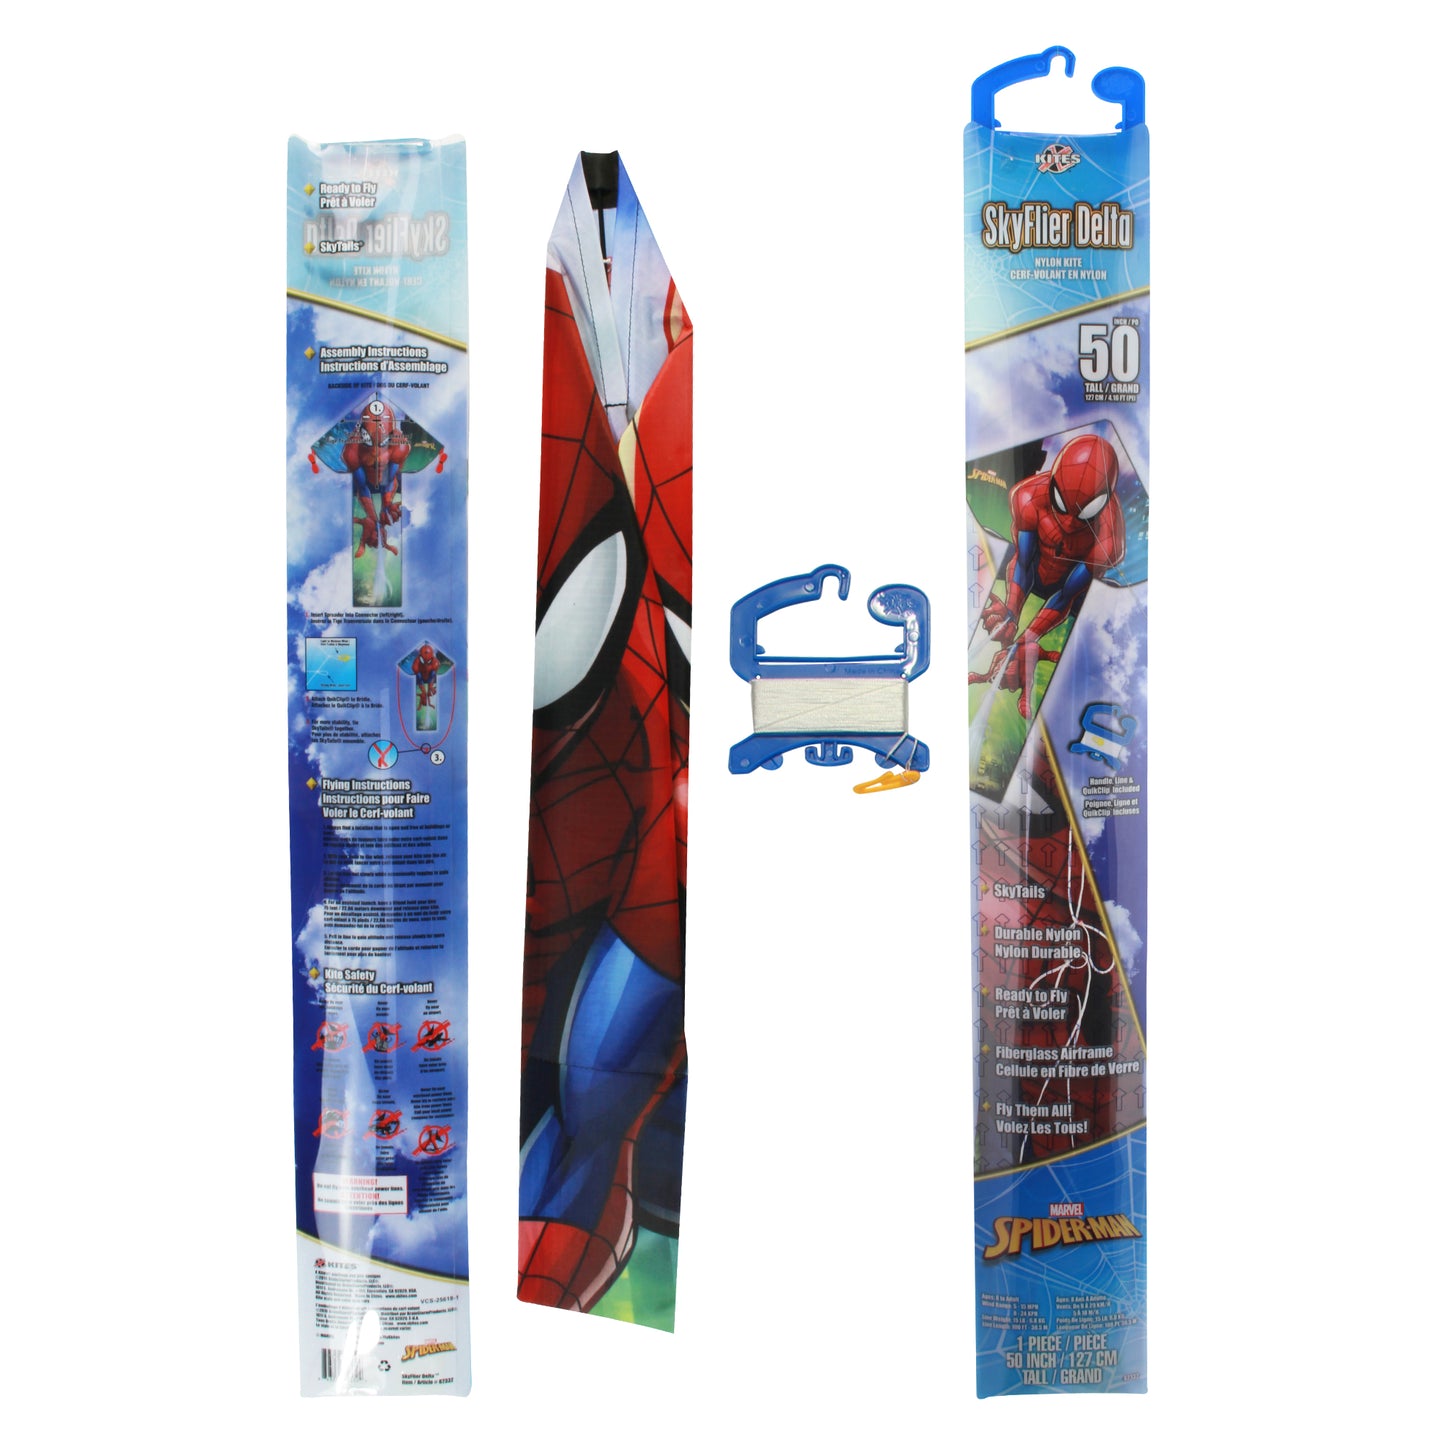 X Kites SkyFlier Delta Spider-Man product and packaging